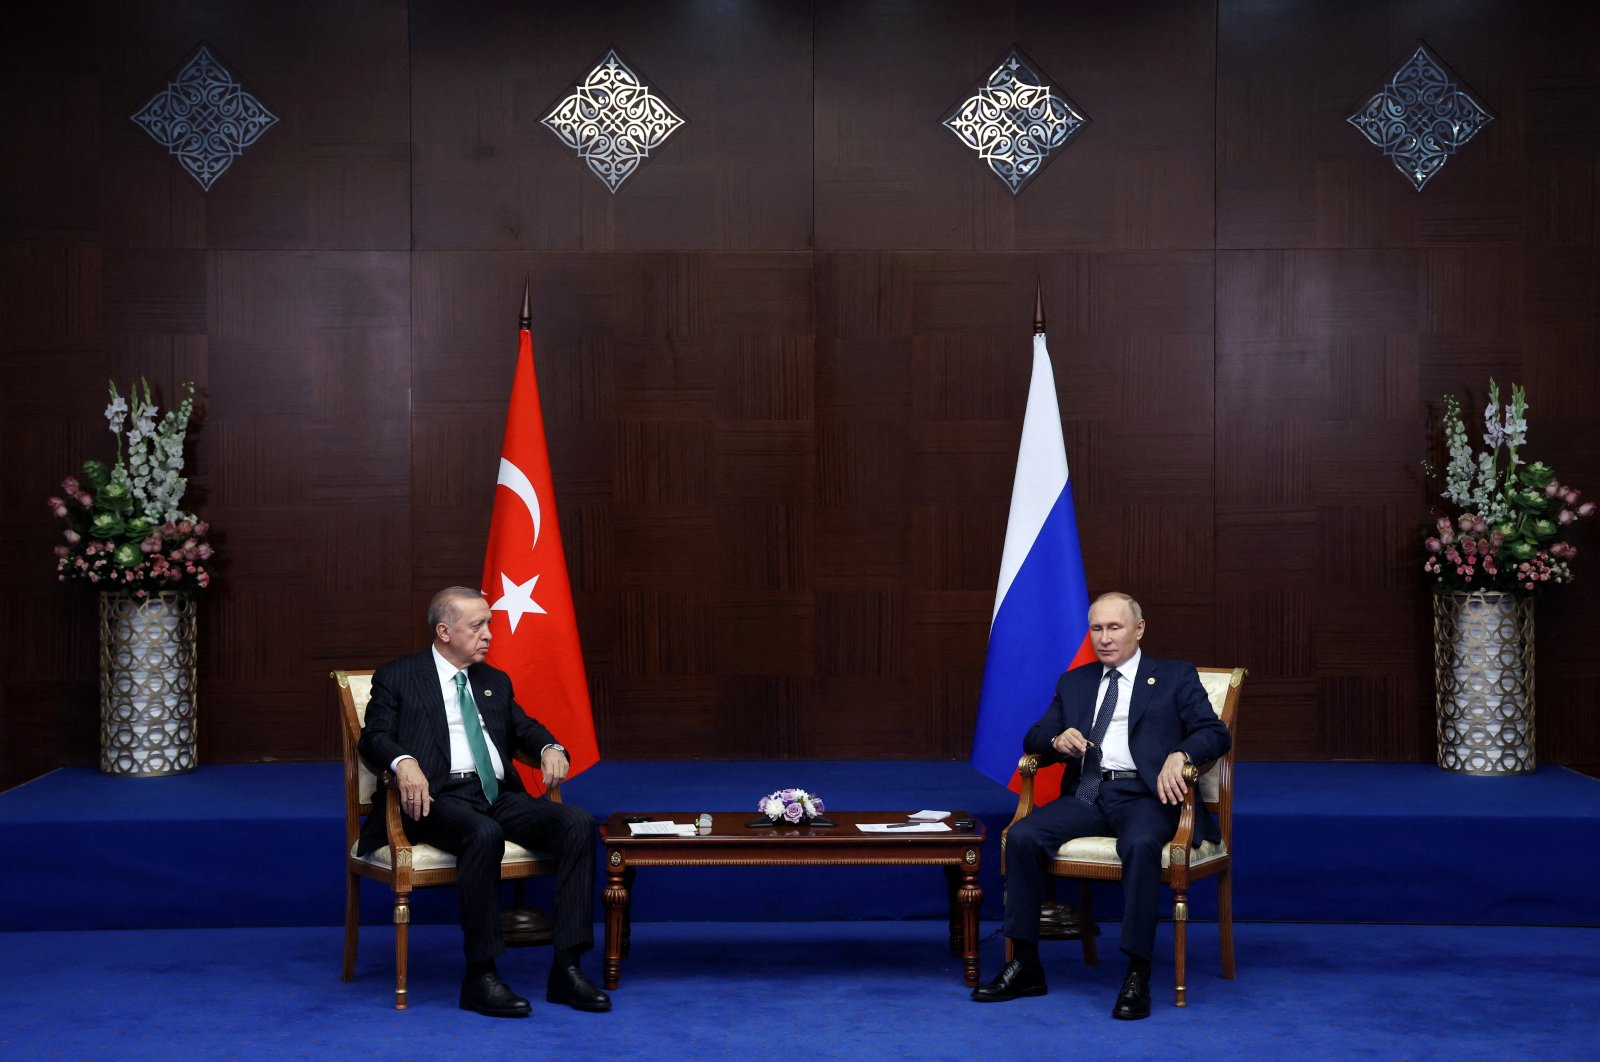 Russia&#039;s President Vladimir Putin and President Recep Tayyip Erdoğan meet on the sidelines of the 6th summit of the Conference on Interaction and Confidence-building Measures in Asia (CICA), in Astana, Kazakhstan, Oct. 13, 2022.  (Reuters Photo)